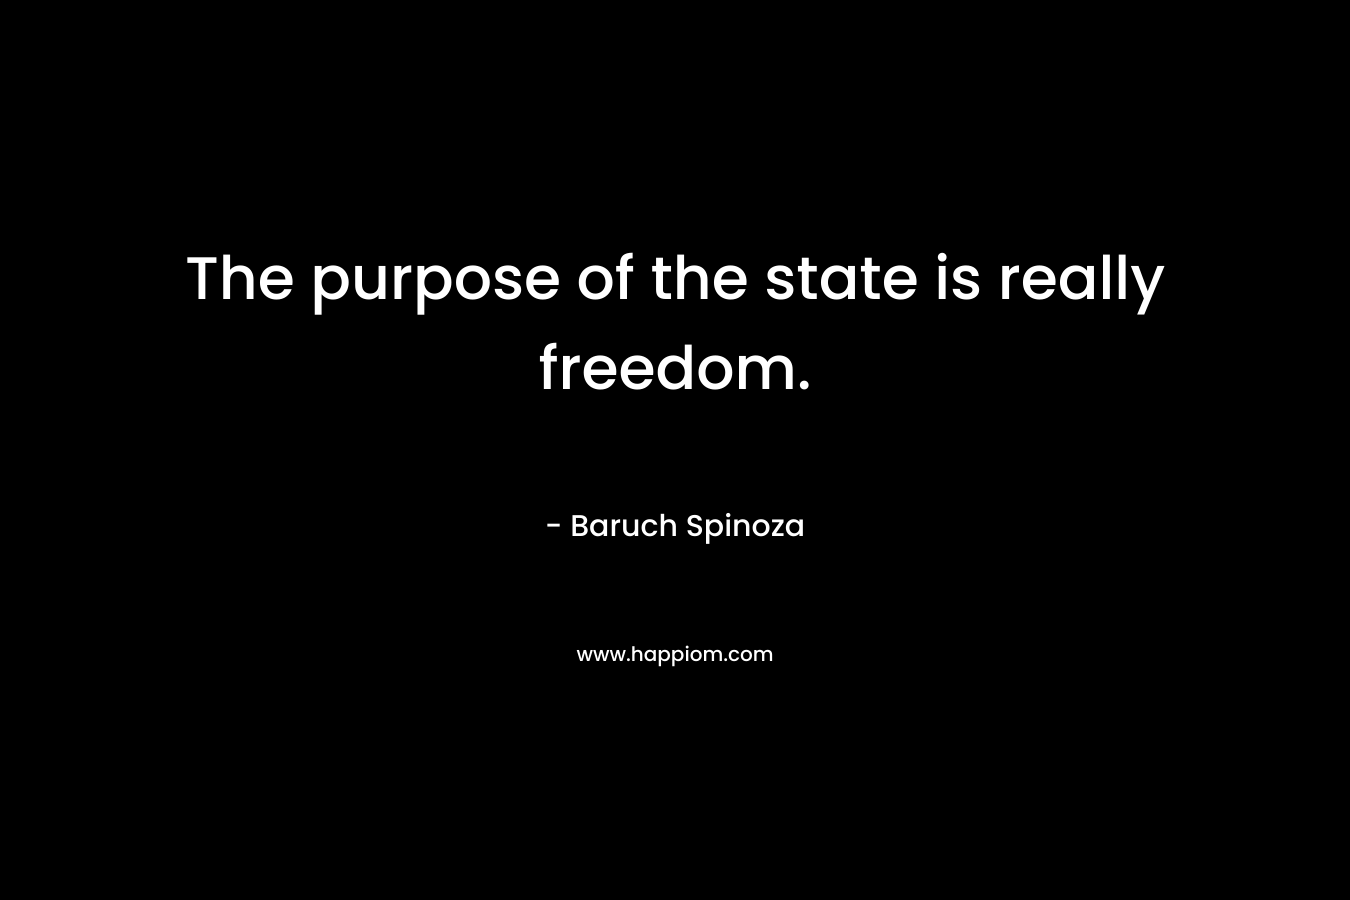 The purpose of the state is really freedom.